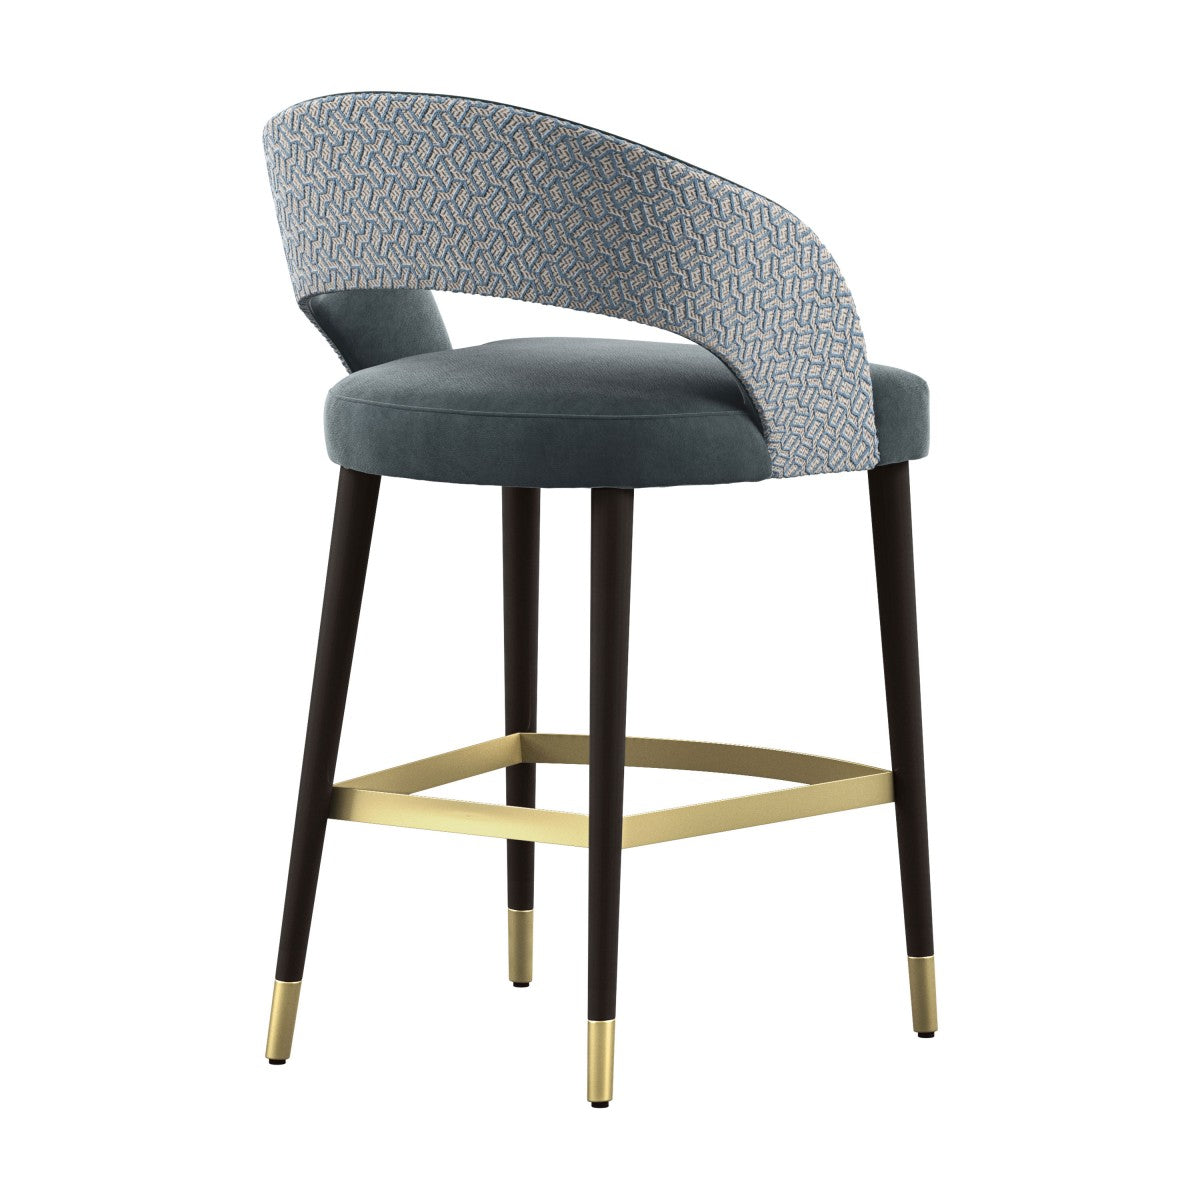 Julia Bespoke Upholstered Contemporary Kitchen Counter Barstool MS638C Custom Made To Order